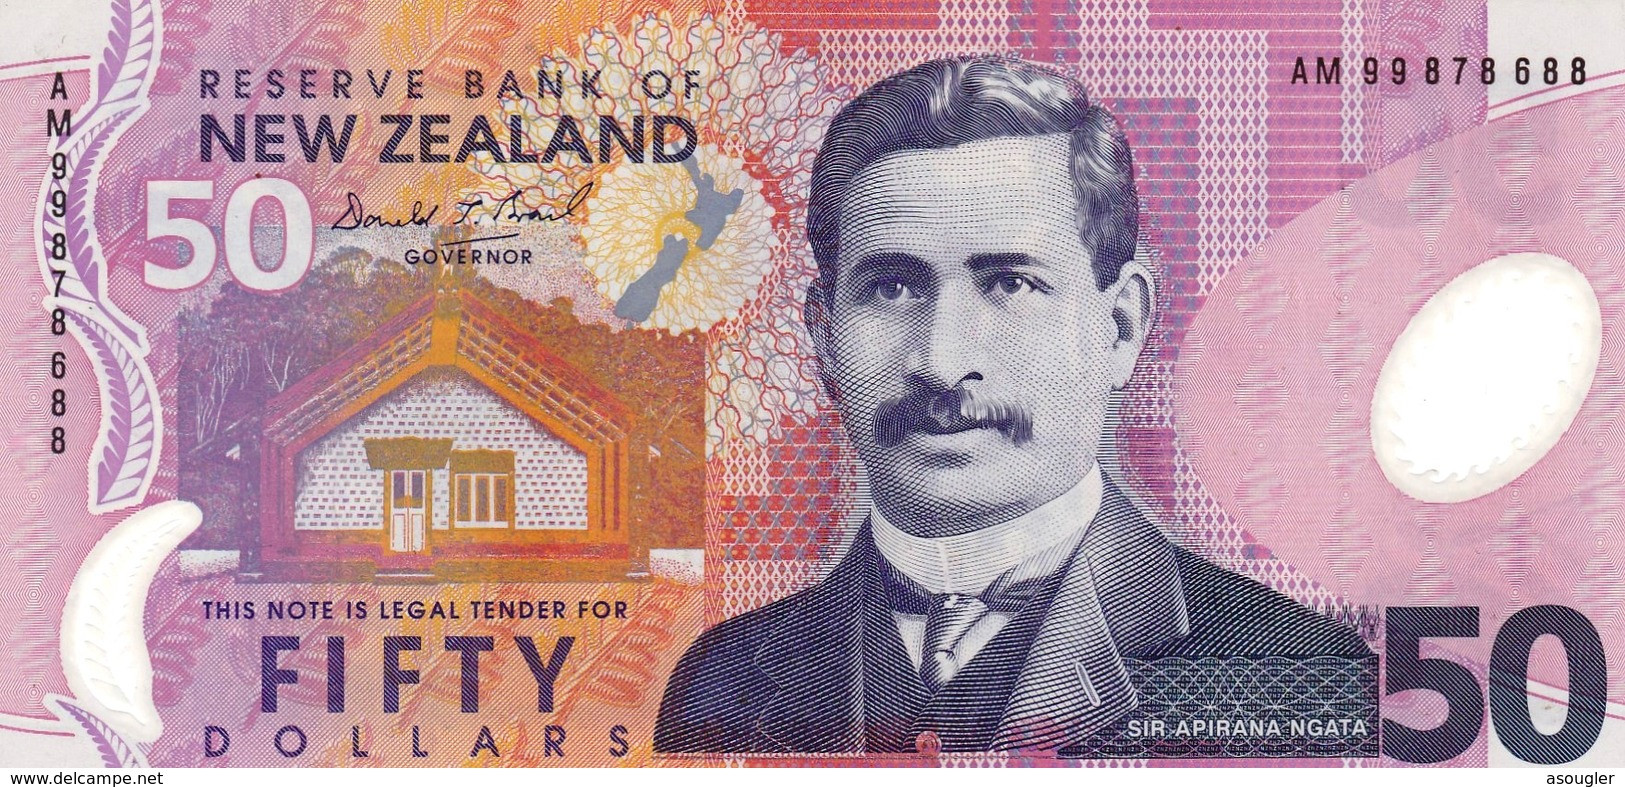 NEW ZEALAND 50 DOLLARS ND 1999 AU P-188a (free Shipping Via Registered Air Mail) - Nouvelle-Zélande